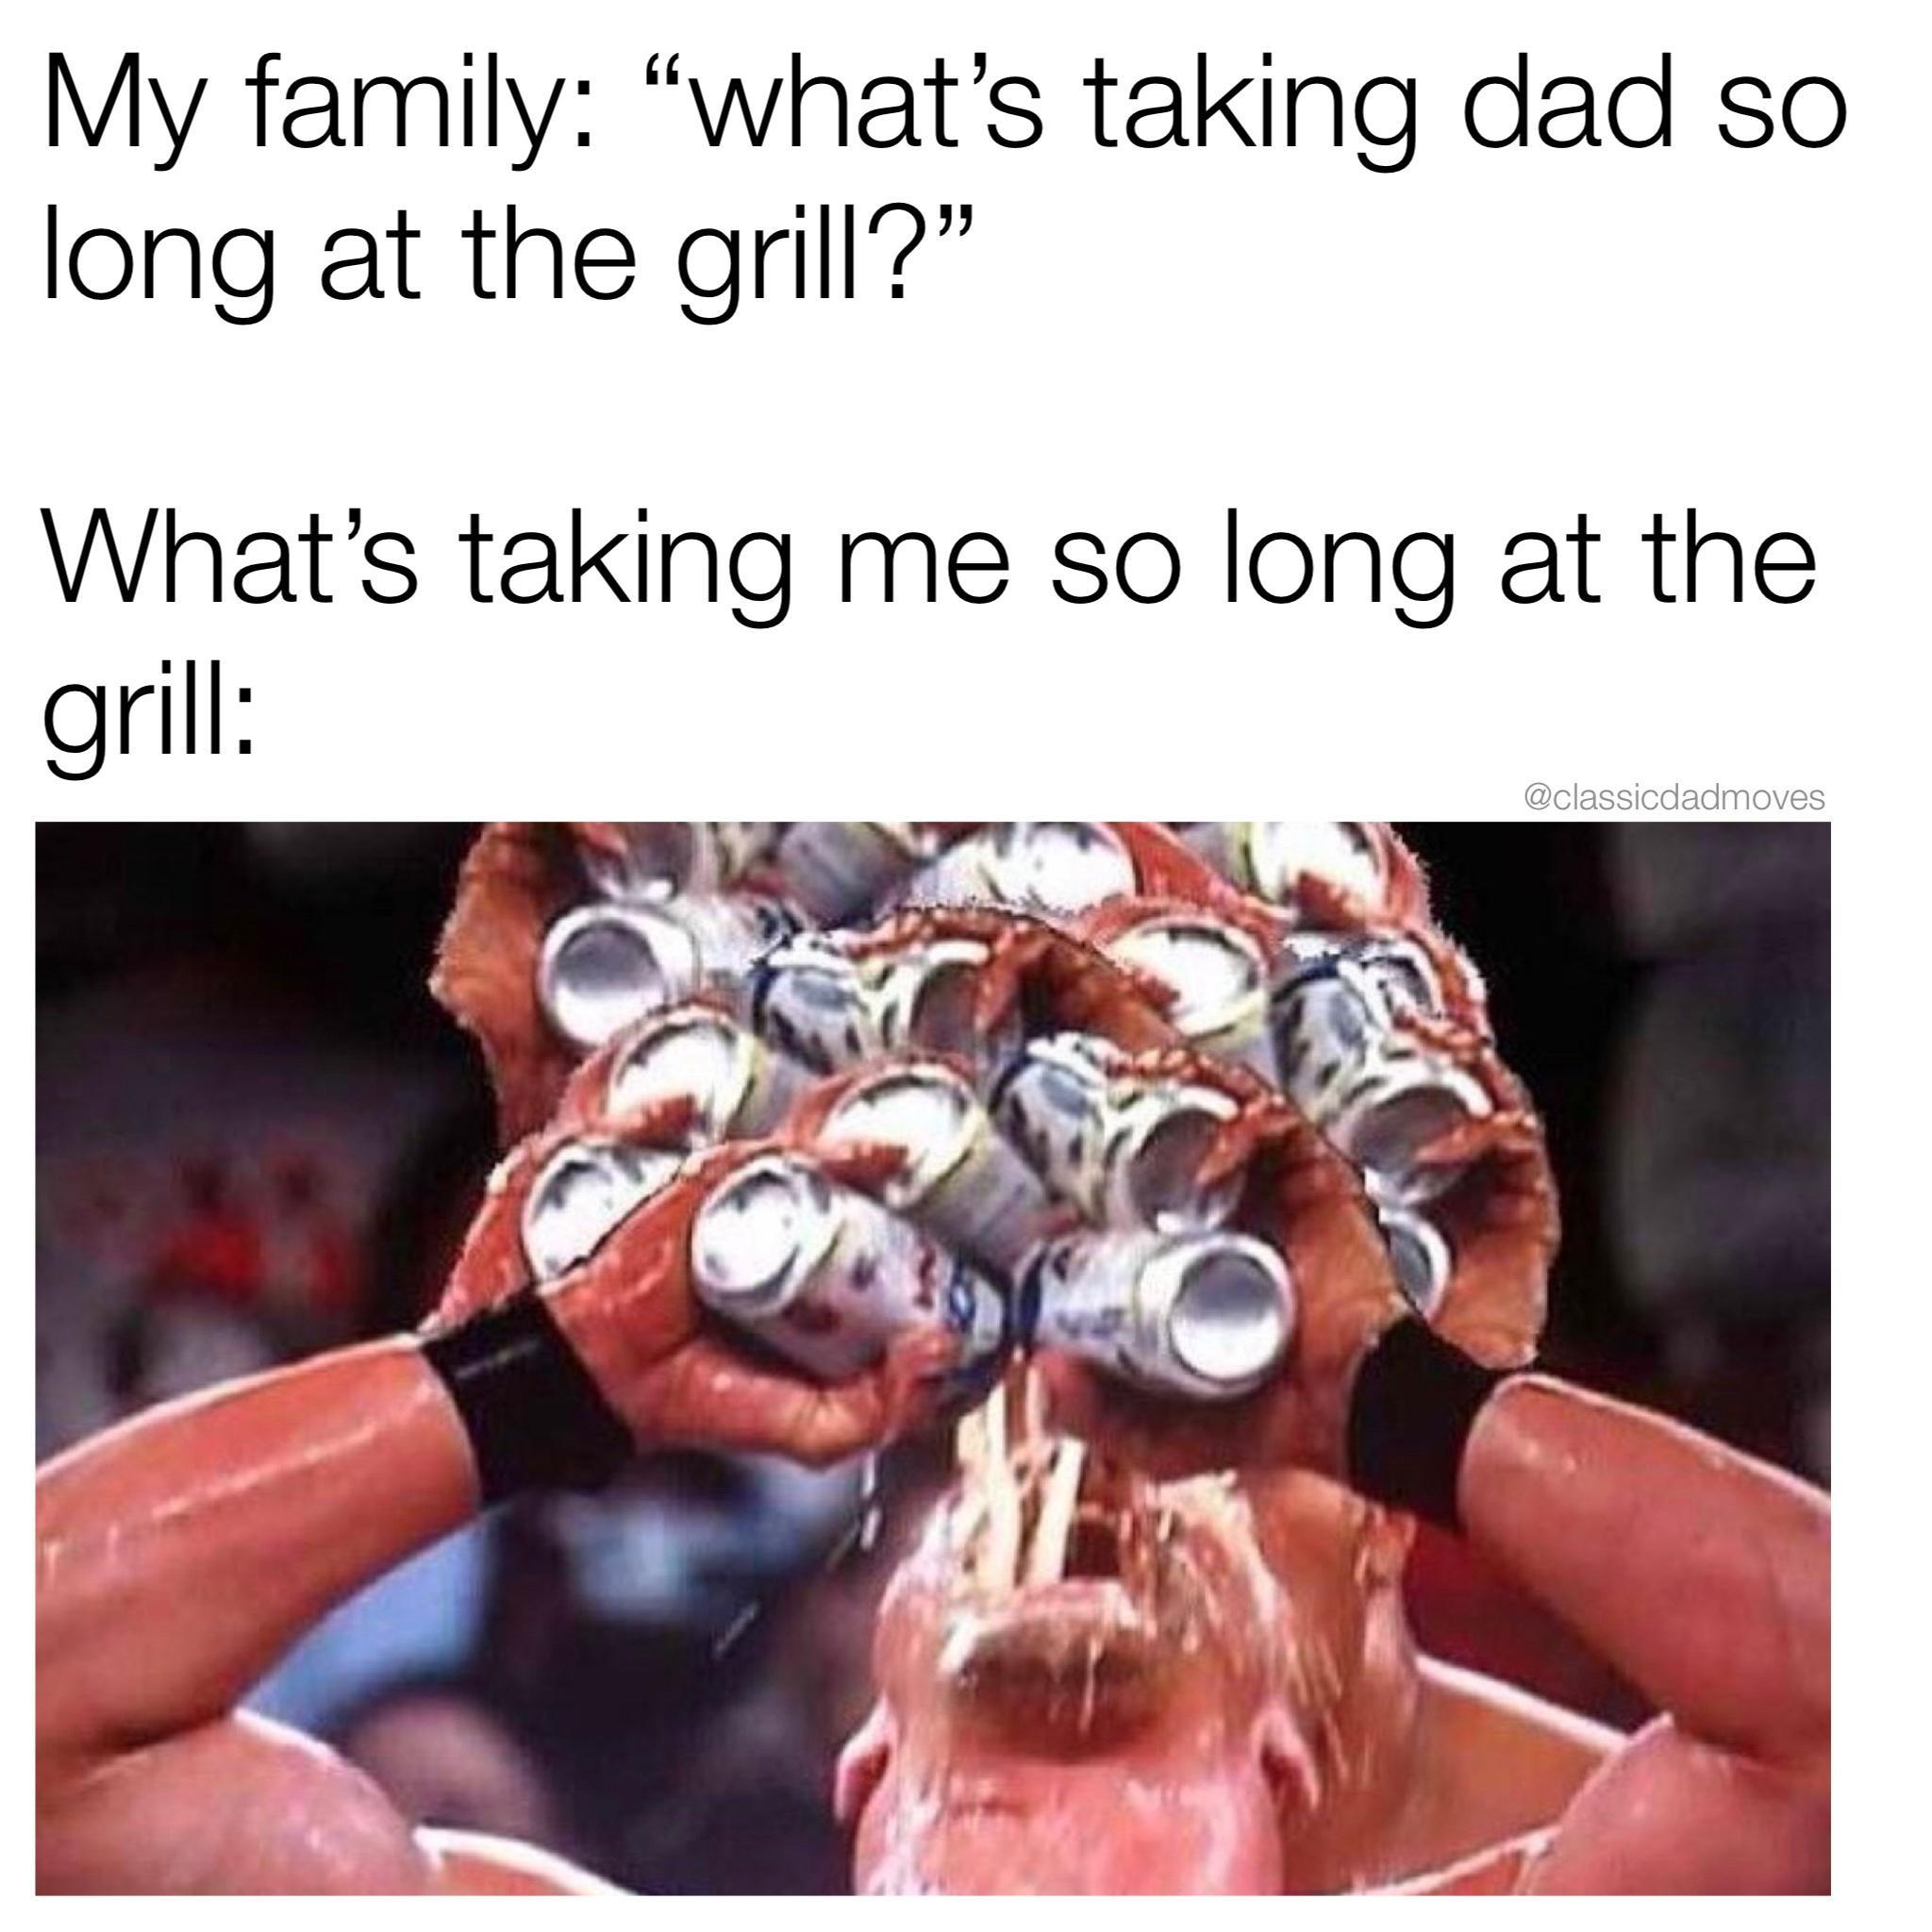 funny memes and pics - jaw - My family "what's taking dad so long at the grill? What's taking me so long at the grill